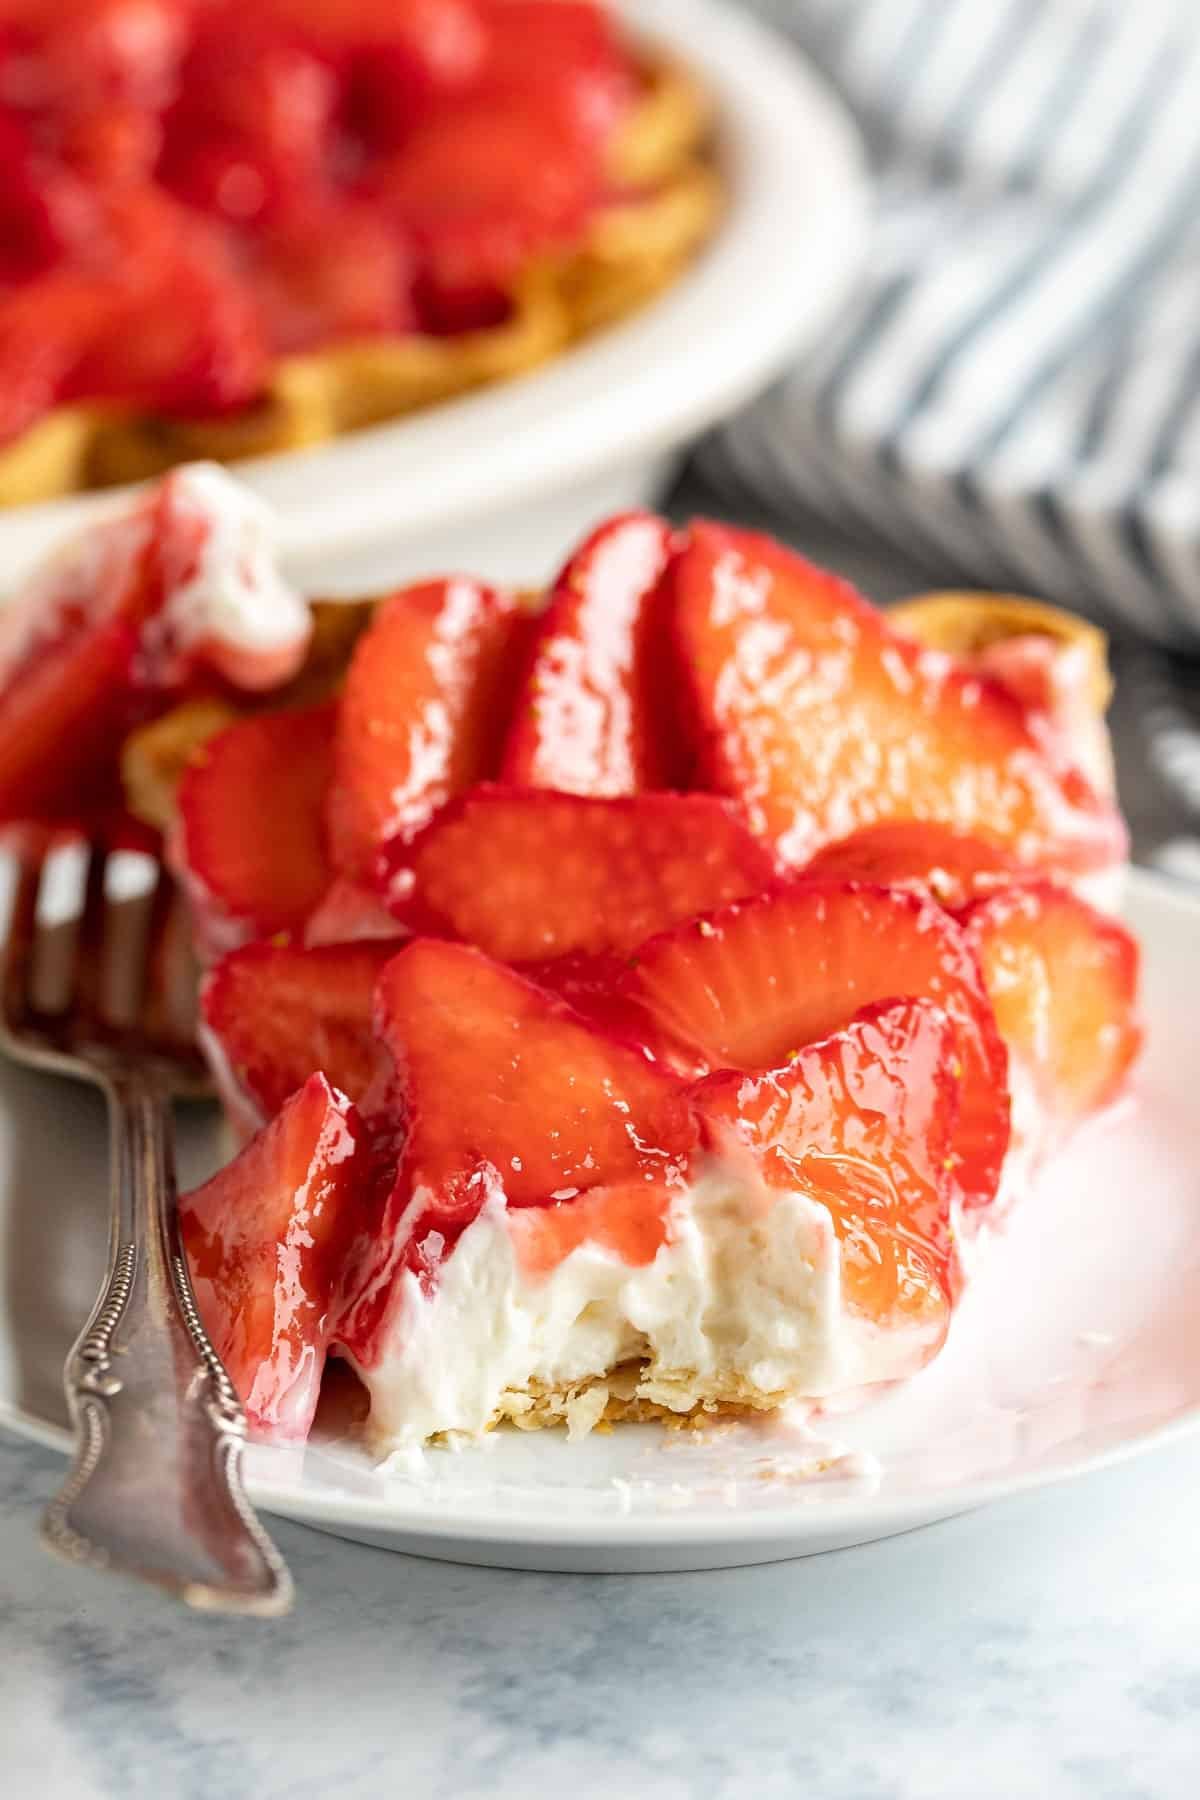 An image looking straight at a slice of strawberry cream cheese pie with a bite taken off revealing the creamy filling with the strawberries on top.